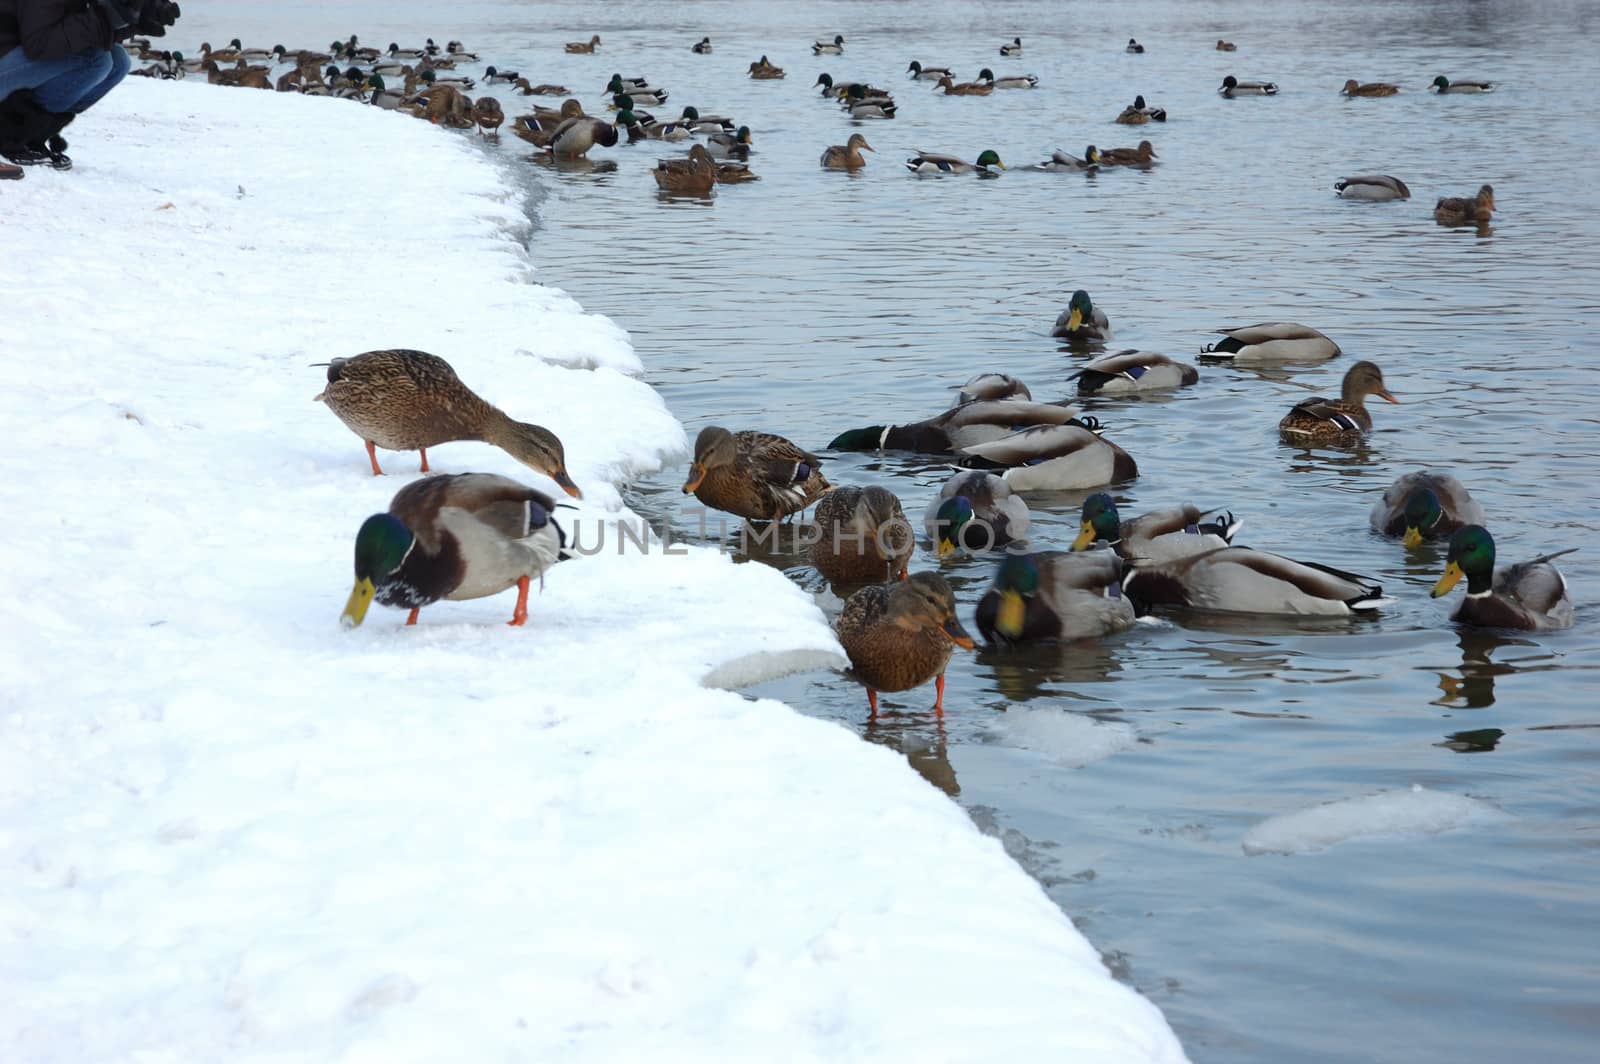 View of snowy winter riverbank with flock of ducks